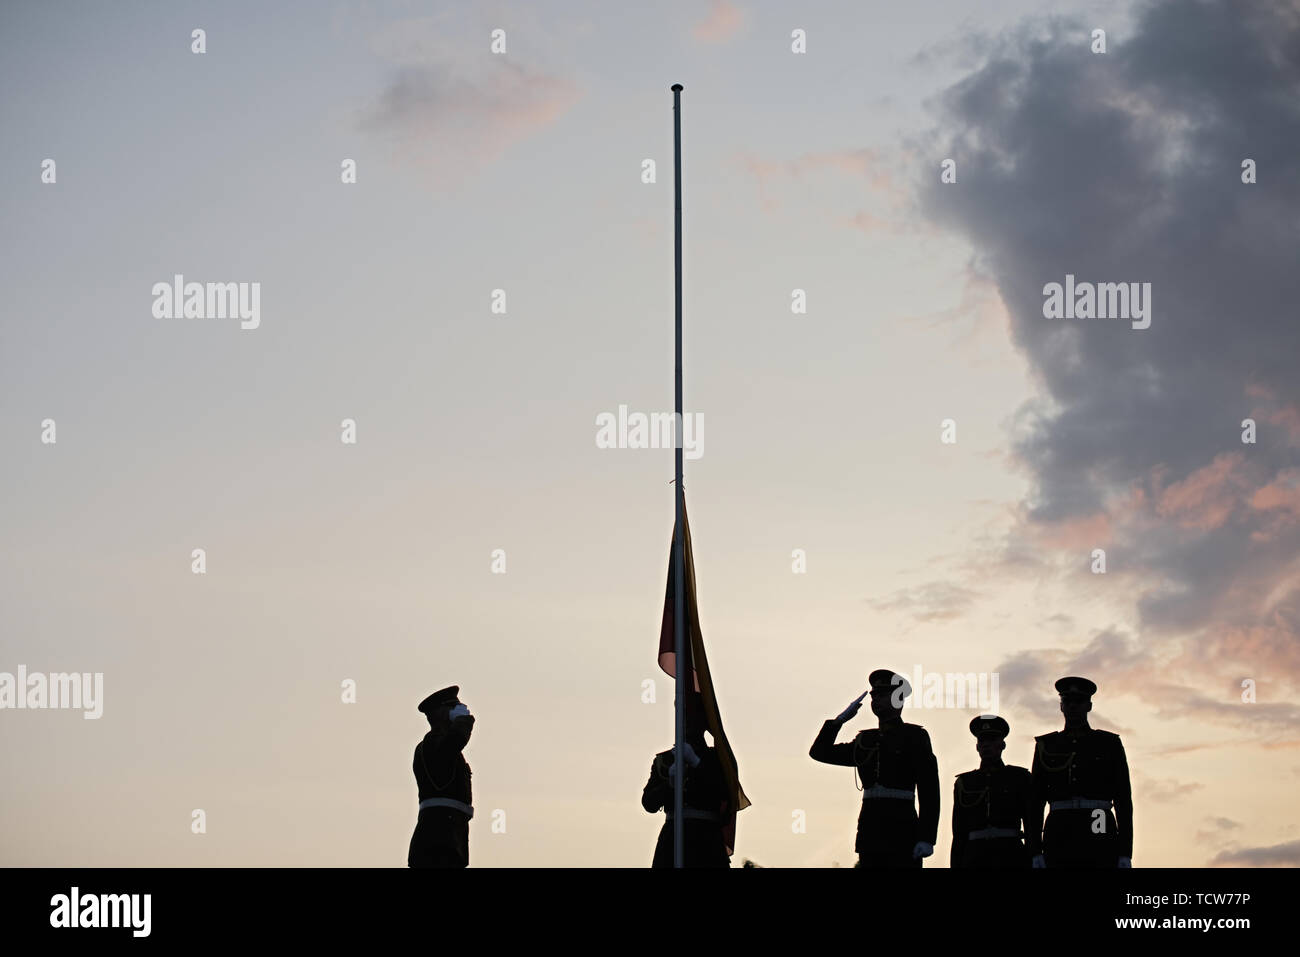 Soldiers Raising The Lithuanian Flag At Sunset Stock Photo